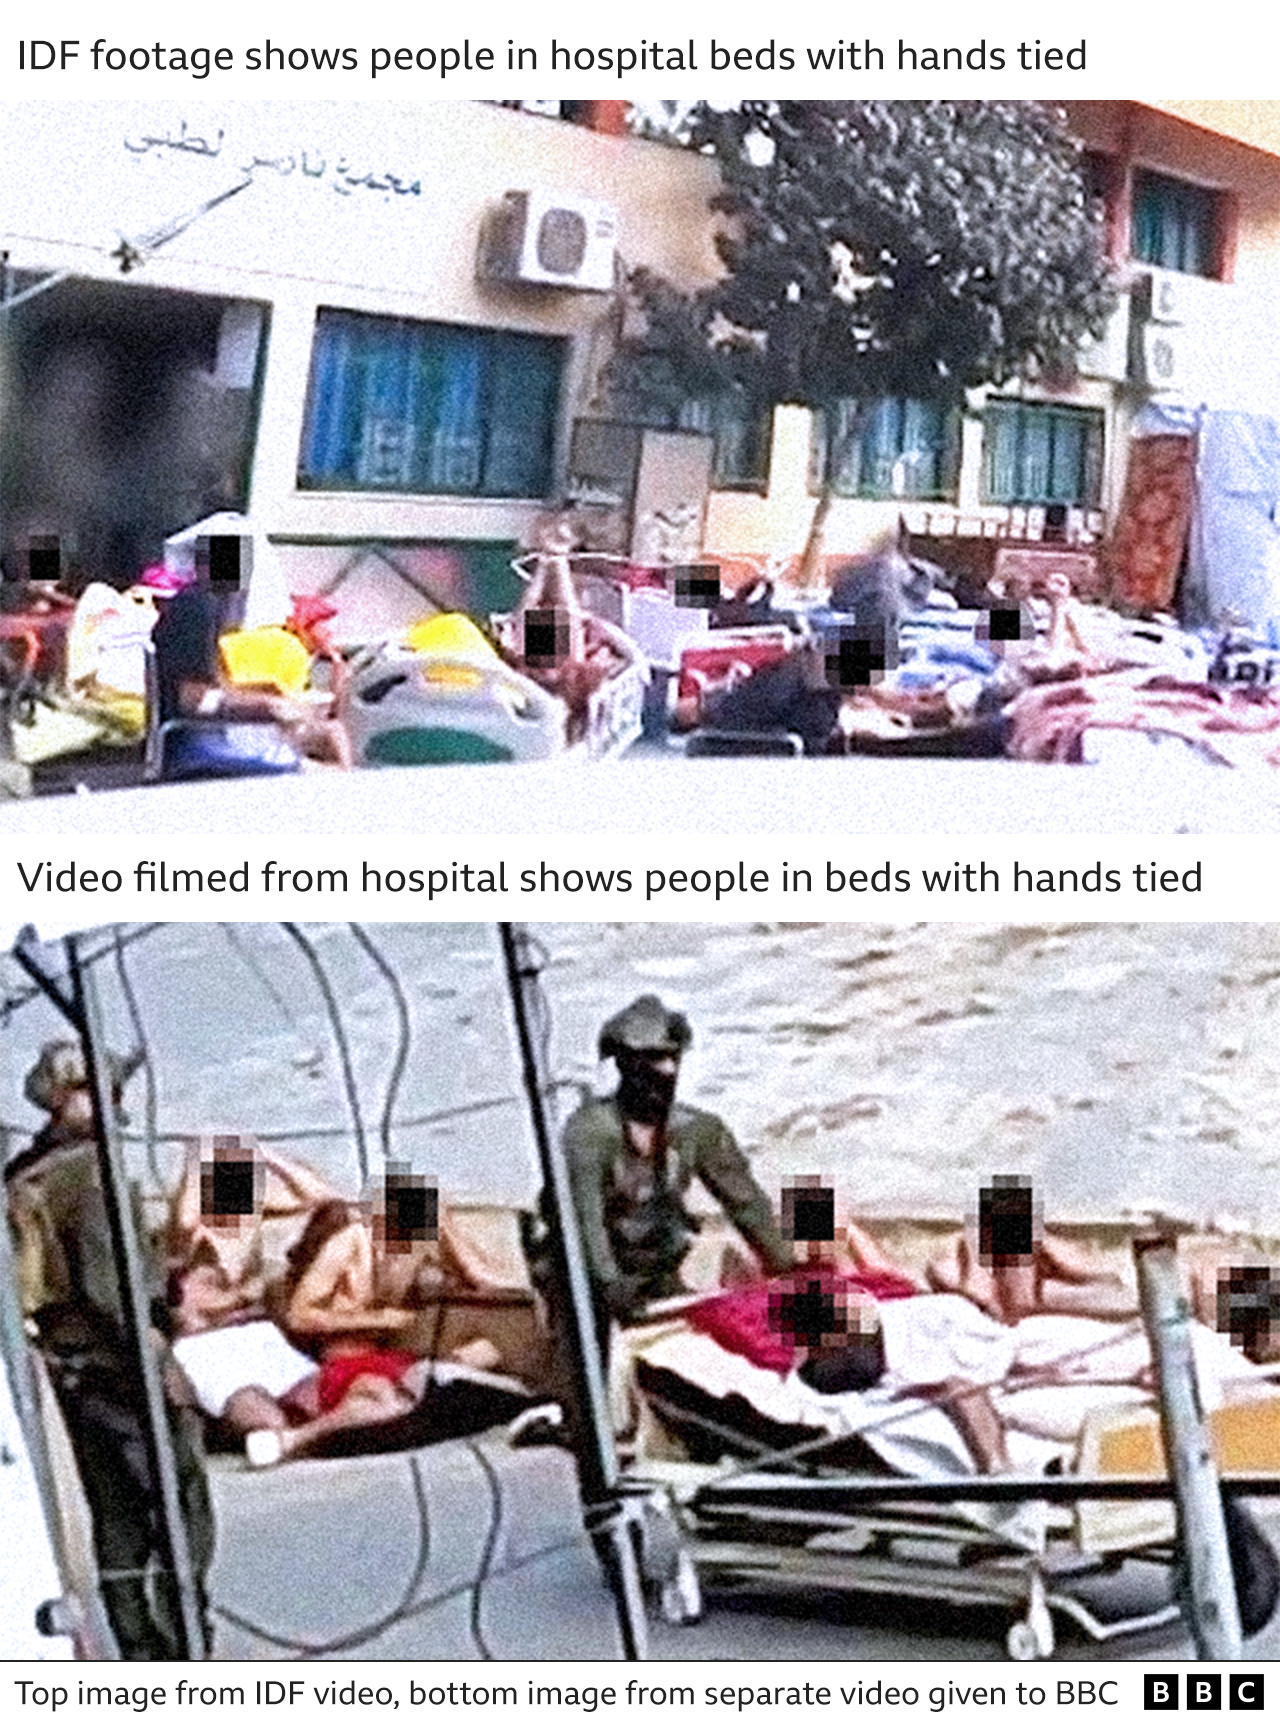 Still images from two videos showing patients with hands tied. One video was from the IDF, the other was filmed from inside the hospital